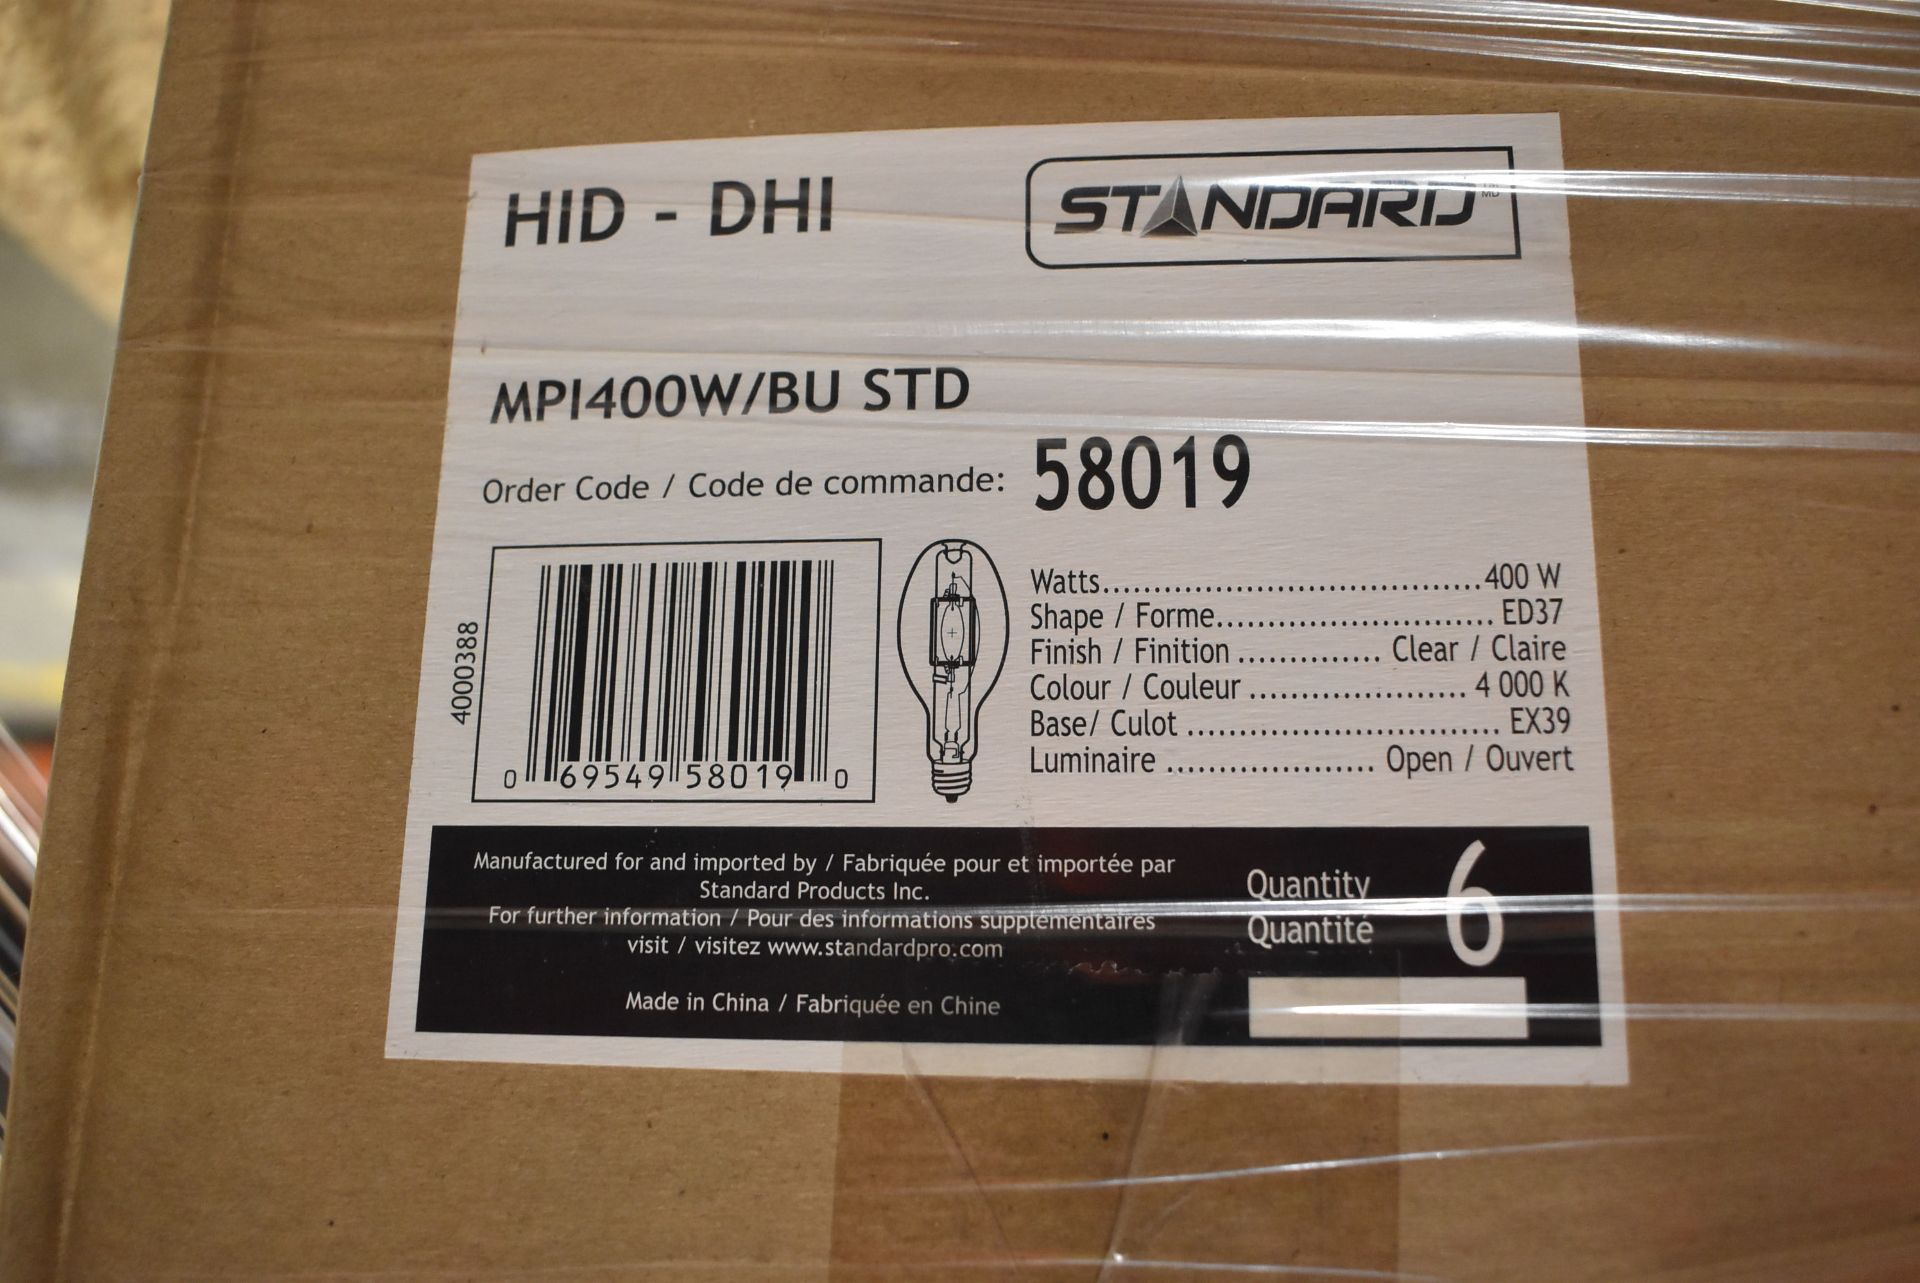 LOT/ SKID WITH STANDARD HID 400W OVERHEAD LIGHT BULBS (CMD WAREHOUSE) [CMD-185-22S] - Image 4 of 6